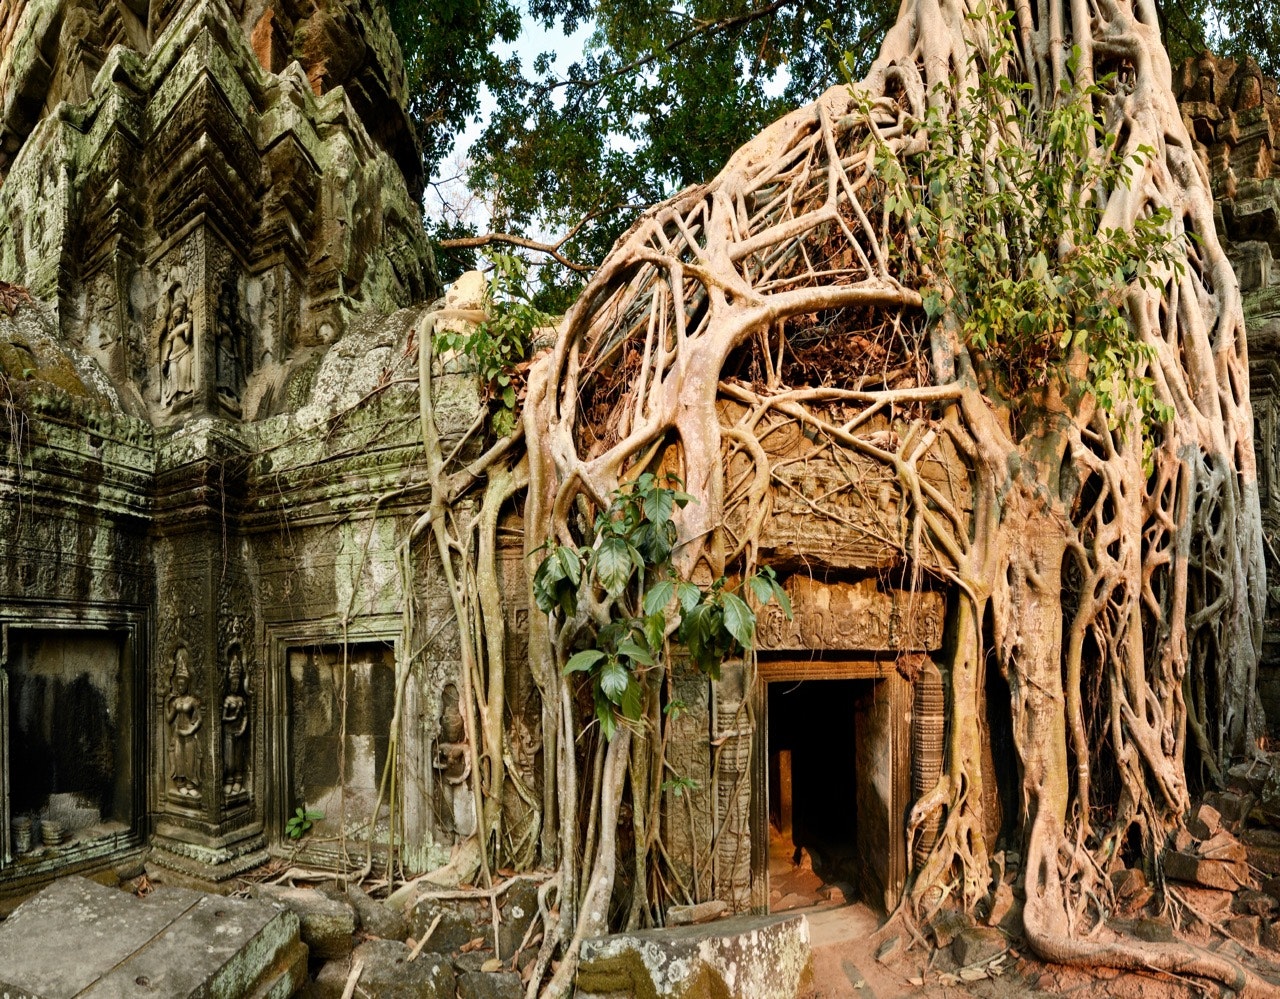 Tangle of roots (from a Tetrameles nudiflora) growing over the ruins of Ta Prohm Temple.